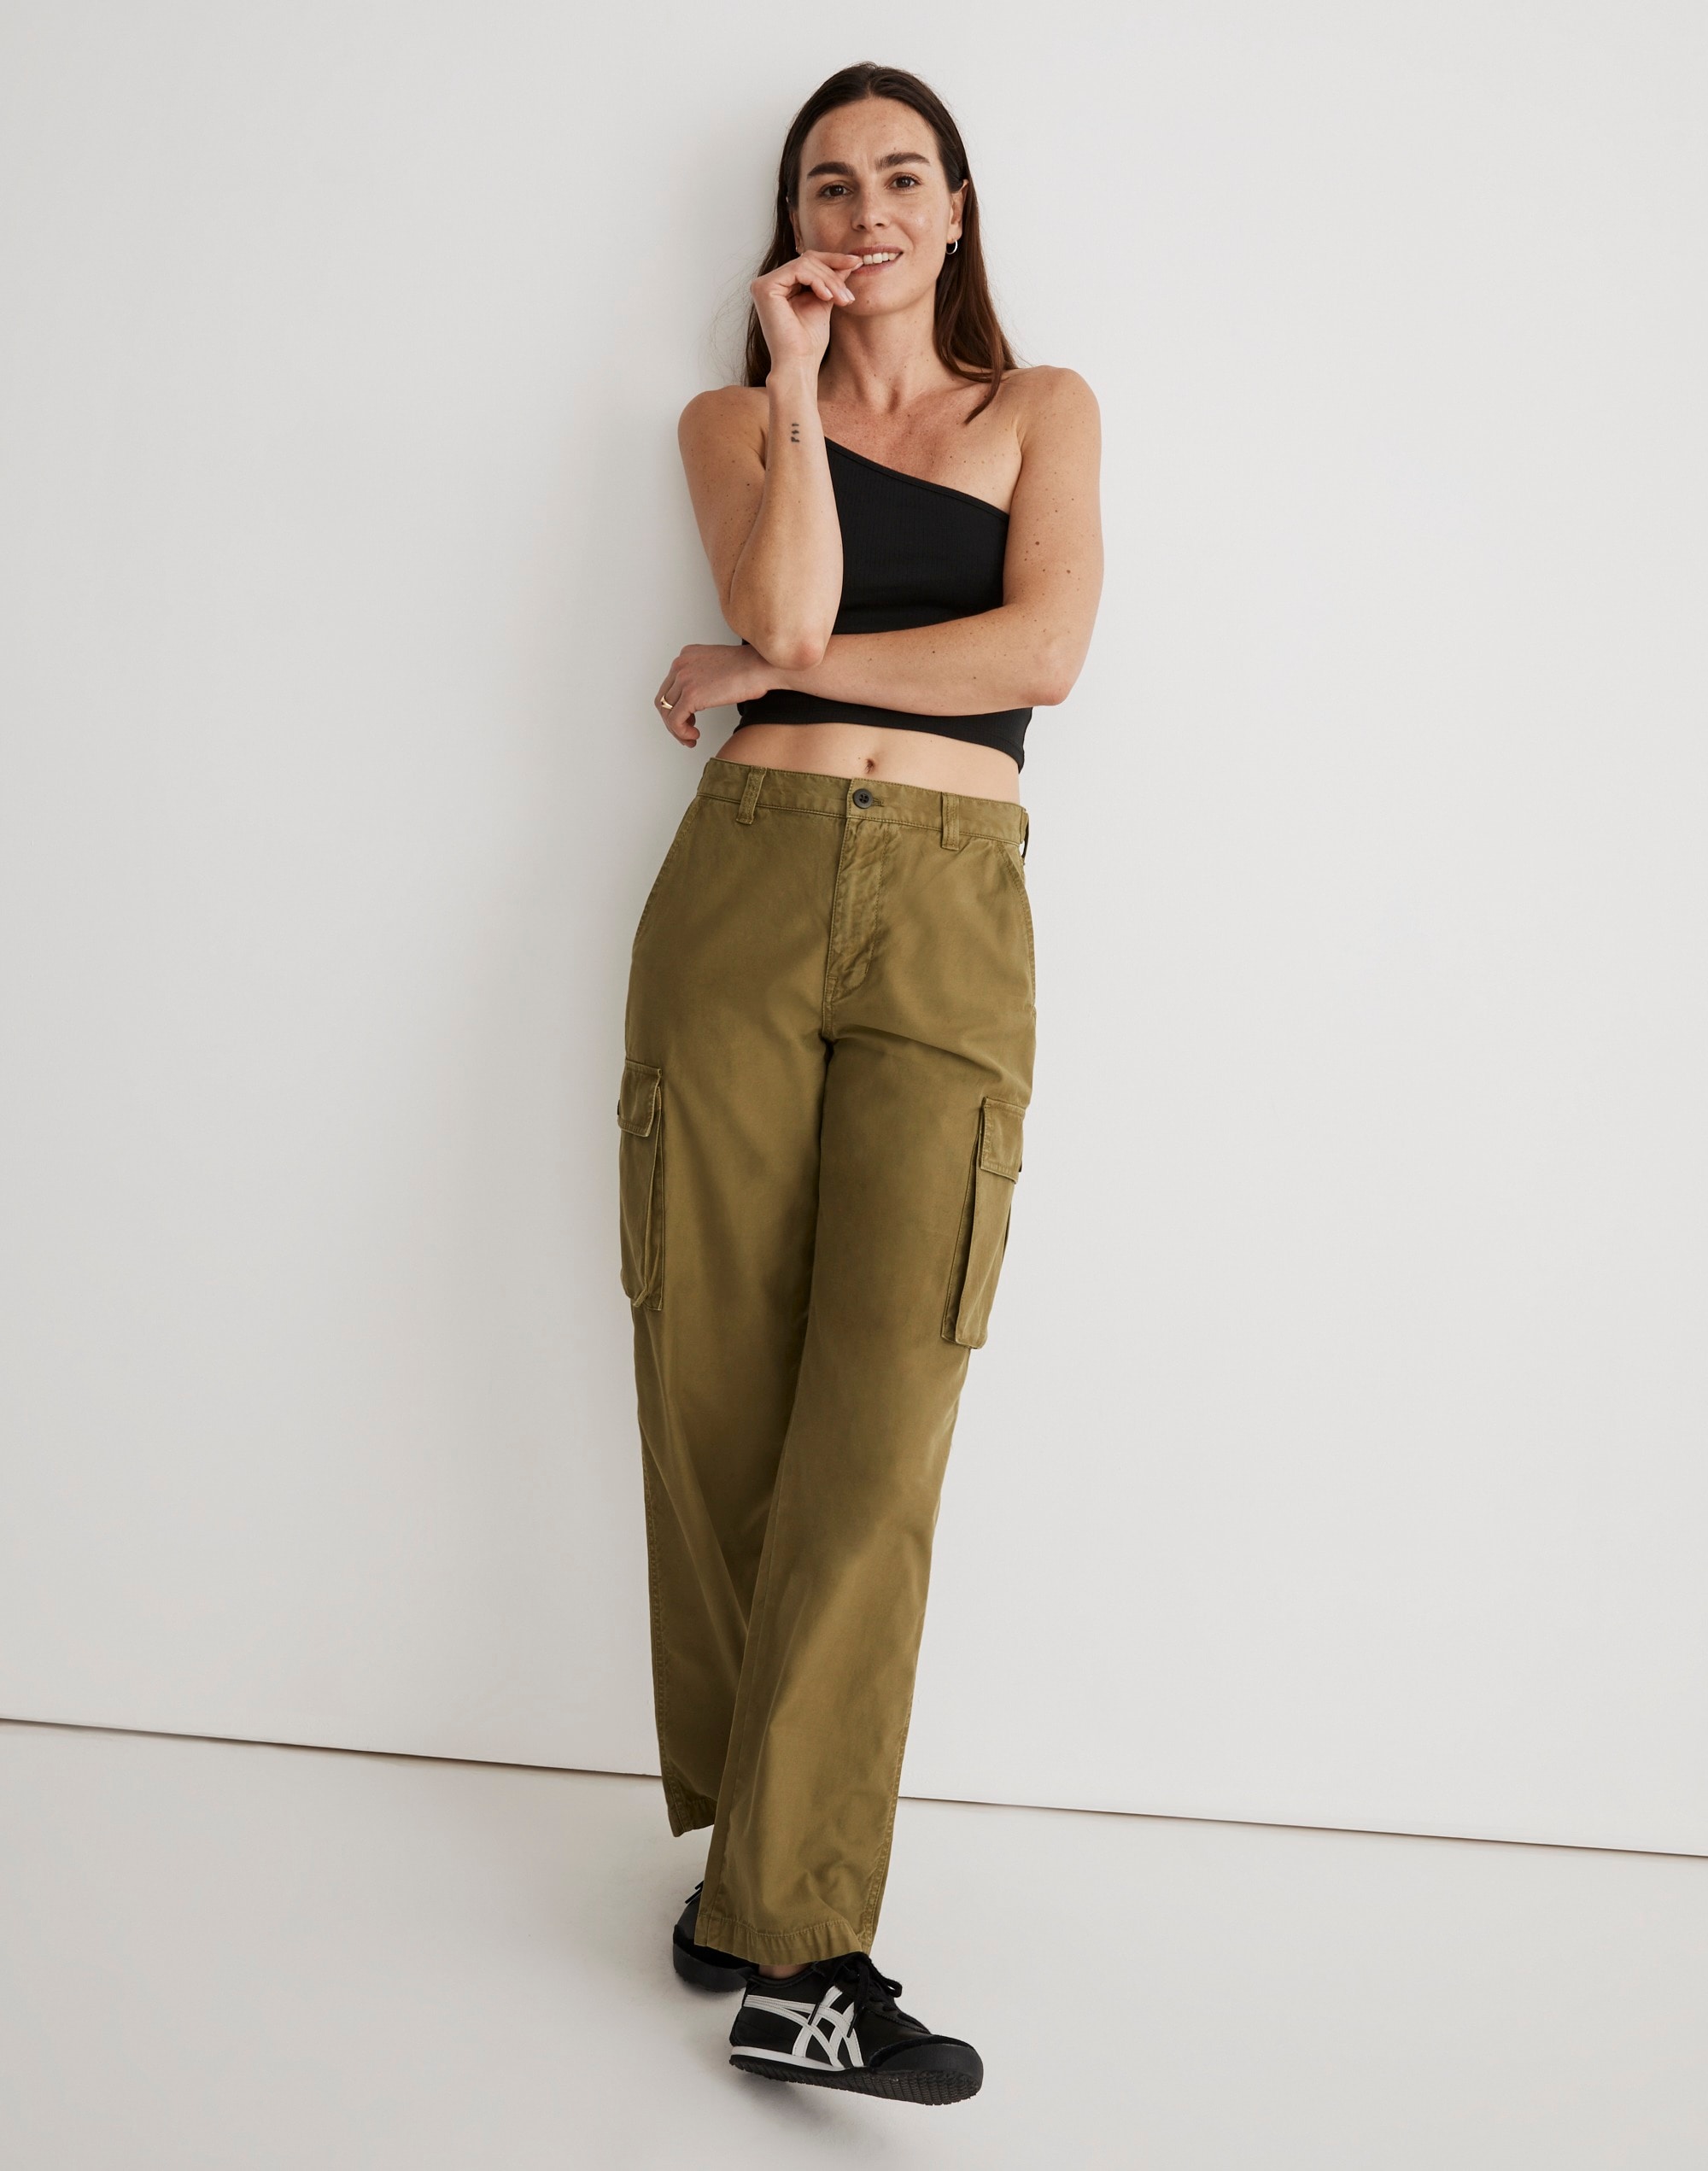 Low Rise Drawstring Side Pocket Ruched Lounge Cotton Joggers